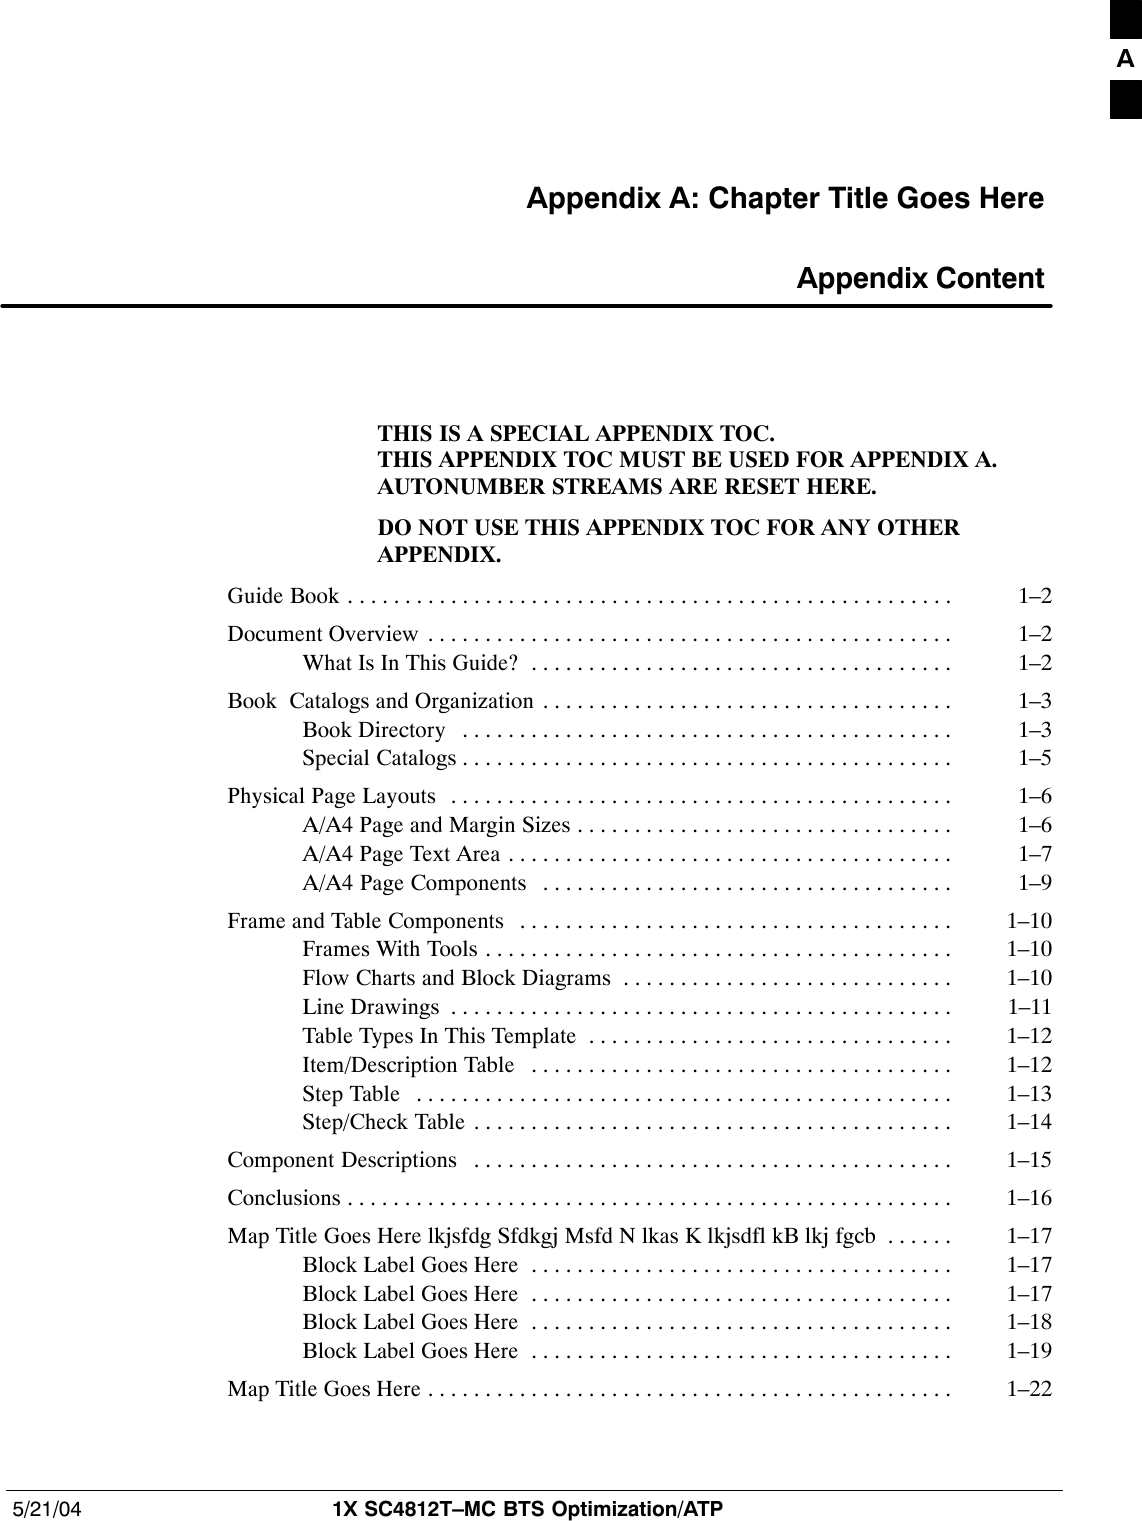 5/21/04 1X SC4812T–MC BTS Optimization/ATPDRAFTAppendix A: Chapter Title Goes Here Appendix ContentTHIS IS A SPECIAL APPENDIX TOC.THIS APPENDIX TOC MUST BE USED FOR APPENDIX A.AUTONUMBER STREAMS ARE RESET HERE.DO NOT USE THIS APPENDIX TOC FOR ANY OTHERAPPENDIX.Guide Book 1–2. . . . . . . . . . . . . . . . . . . . . . . . . . . . . . . . . . . . . . . . . . . . . . . . . . . . . Document Overview 1–2. . . . . . . . . . . . . . . . . . . . . . . . . . . . . . . . . . . . . . . . . . . . . . What Is In This Guide? 1–2. . . . . . . . . . . . . . . . . . . . . . . . . . . . . . . . . . . . . Book  Catalogs and Organization 1–3. . . . . . . . . . . . . . . . . . . . . . . . . . . . . . . . . . . . Book Directory 1–3. . . . . . . . . . . . . . . . . . . . . . . . . . . . . . . . . . . . . . . . . . . Special Catalogs 1–5. . . . . . . . . . . . . . . . . . . . . . . . . . . . . . . . . . . . . . . . . . . Physical Page Layouts 1–6. . . . . . . . . . . . . . . . . . . . . . . . . . . . . . . . . . . . . . . . . . . . A/A4 Page and Margin Sizes 1–6. . . . . . . . . . . . . . . . . . . . . . . . . . . . . . . . . A/A4 Page Text Area 1–7. . . . . . . . . . . . . . . . . . . . . . . . . . . . . . . . . . . . . . . A/A4 Page Components 1–9. . . . . . . . . . . . . . . . . . . . . . . . . . . . . . . . . . . . Frame and Table Components 1–10. . . . . . . . . . . . . . . . . . . . . . . . . . . . . . . . . . . . . . Frames With Tools 1–10. . . . . . . . . . . . . . . . . . . . . . . . . . . . . . . . . . . . . . . . . Flow Charts and Block Diagrams 1–10. . . . . . . . . . . . . . . . . . . . . . . . . . . . . Line Drawings 1–11. . . . . . . . . . . . . . . . . . . . . . . . . . . . . . . . . . . . . . . . . . . . Table Types In This Template 1–12. . . . . . . . . . . . . . . . . . . . . . . . . . . . . . . . Item/Description Table 1–12. . . . . . . . . . . . . . . . . . . . . . . . . . . . . . . . . . . . . Step Table 1–13. . . . . . . . . . . . . . . . . . . . . . . . . . . . . . . . . . . . . . . . . . . . . . . Step/Check Table 1–14. . . . . . . . . . . . . . . . . . . . . . . . . . . . . . . . . . . . . . . . . . Component Descriptions 1–15. . . . . . . . . . . . . . . . . . . . . . . . . . . . . . . . . . . . . . . . . . Conclusions 1–16. . . . . . . . . . . . . . . . . . . . . . . . . . . . . . . . . . . . . . . . . . . . . . . . . . . . . Map Title Goes Here lkjsfdg Sfdkgj Msfd N lkas K lkjsdfl kB lkj fgcb 1–17. . . . . . Block Label Goes Here 1–17. . . . . . . . . . . . . . . . . . . . . . . . . . . . . . . . . . . . . Block Label Goes Here 1–17. . . . . . . . . . . . . . . . . . . . . . . . . . . . . . . . . . . . . Block Label Goes Here 1–18. . . . . . . . . . . . . . . . . . . . . . . . . . . . . . . . . . . . . Block Label Goes Here 1–19. . . . . . . . . . . . . . . . . . . . . . . . . . . . . . . . . . . . . Map Title Goes Here 1–22. . . . . . . . . . . . . . . . . . . . . . . . . . . . . . . . . . . . . . . . . . . . . . A